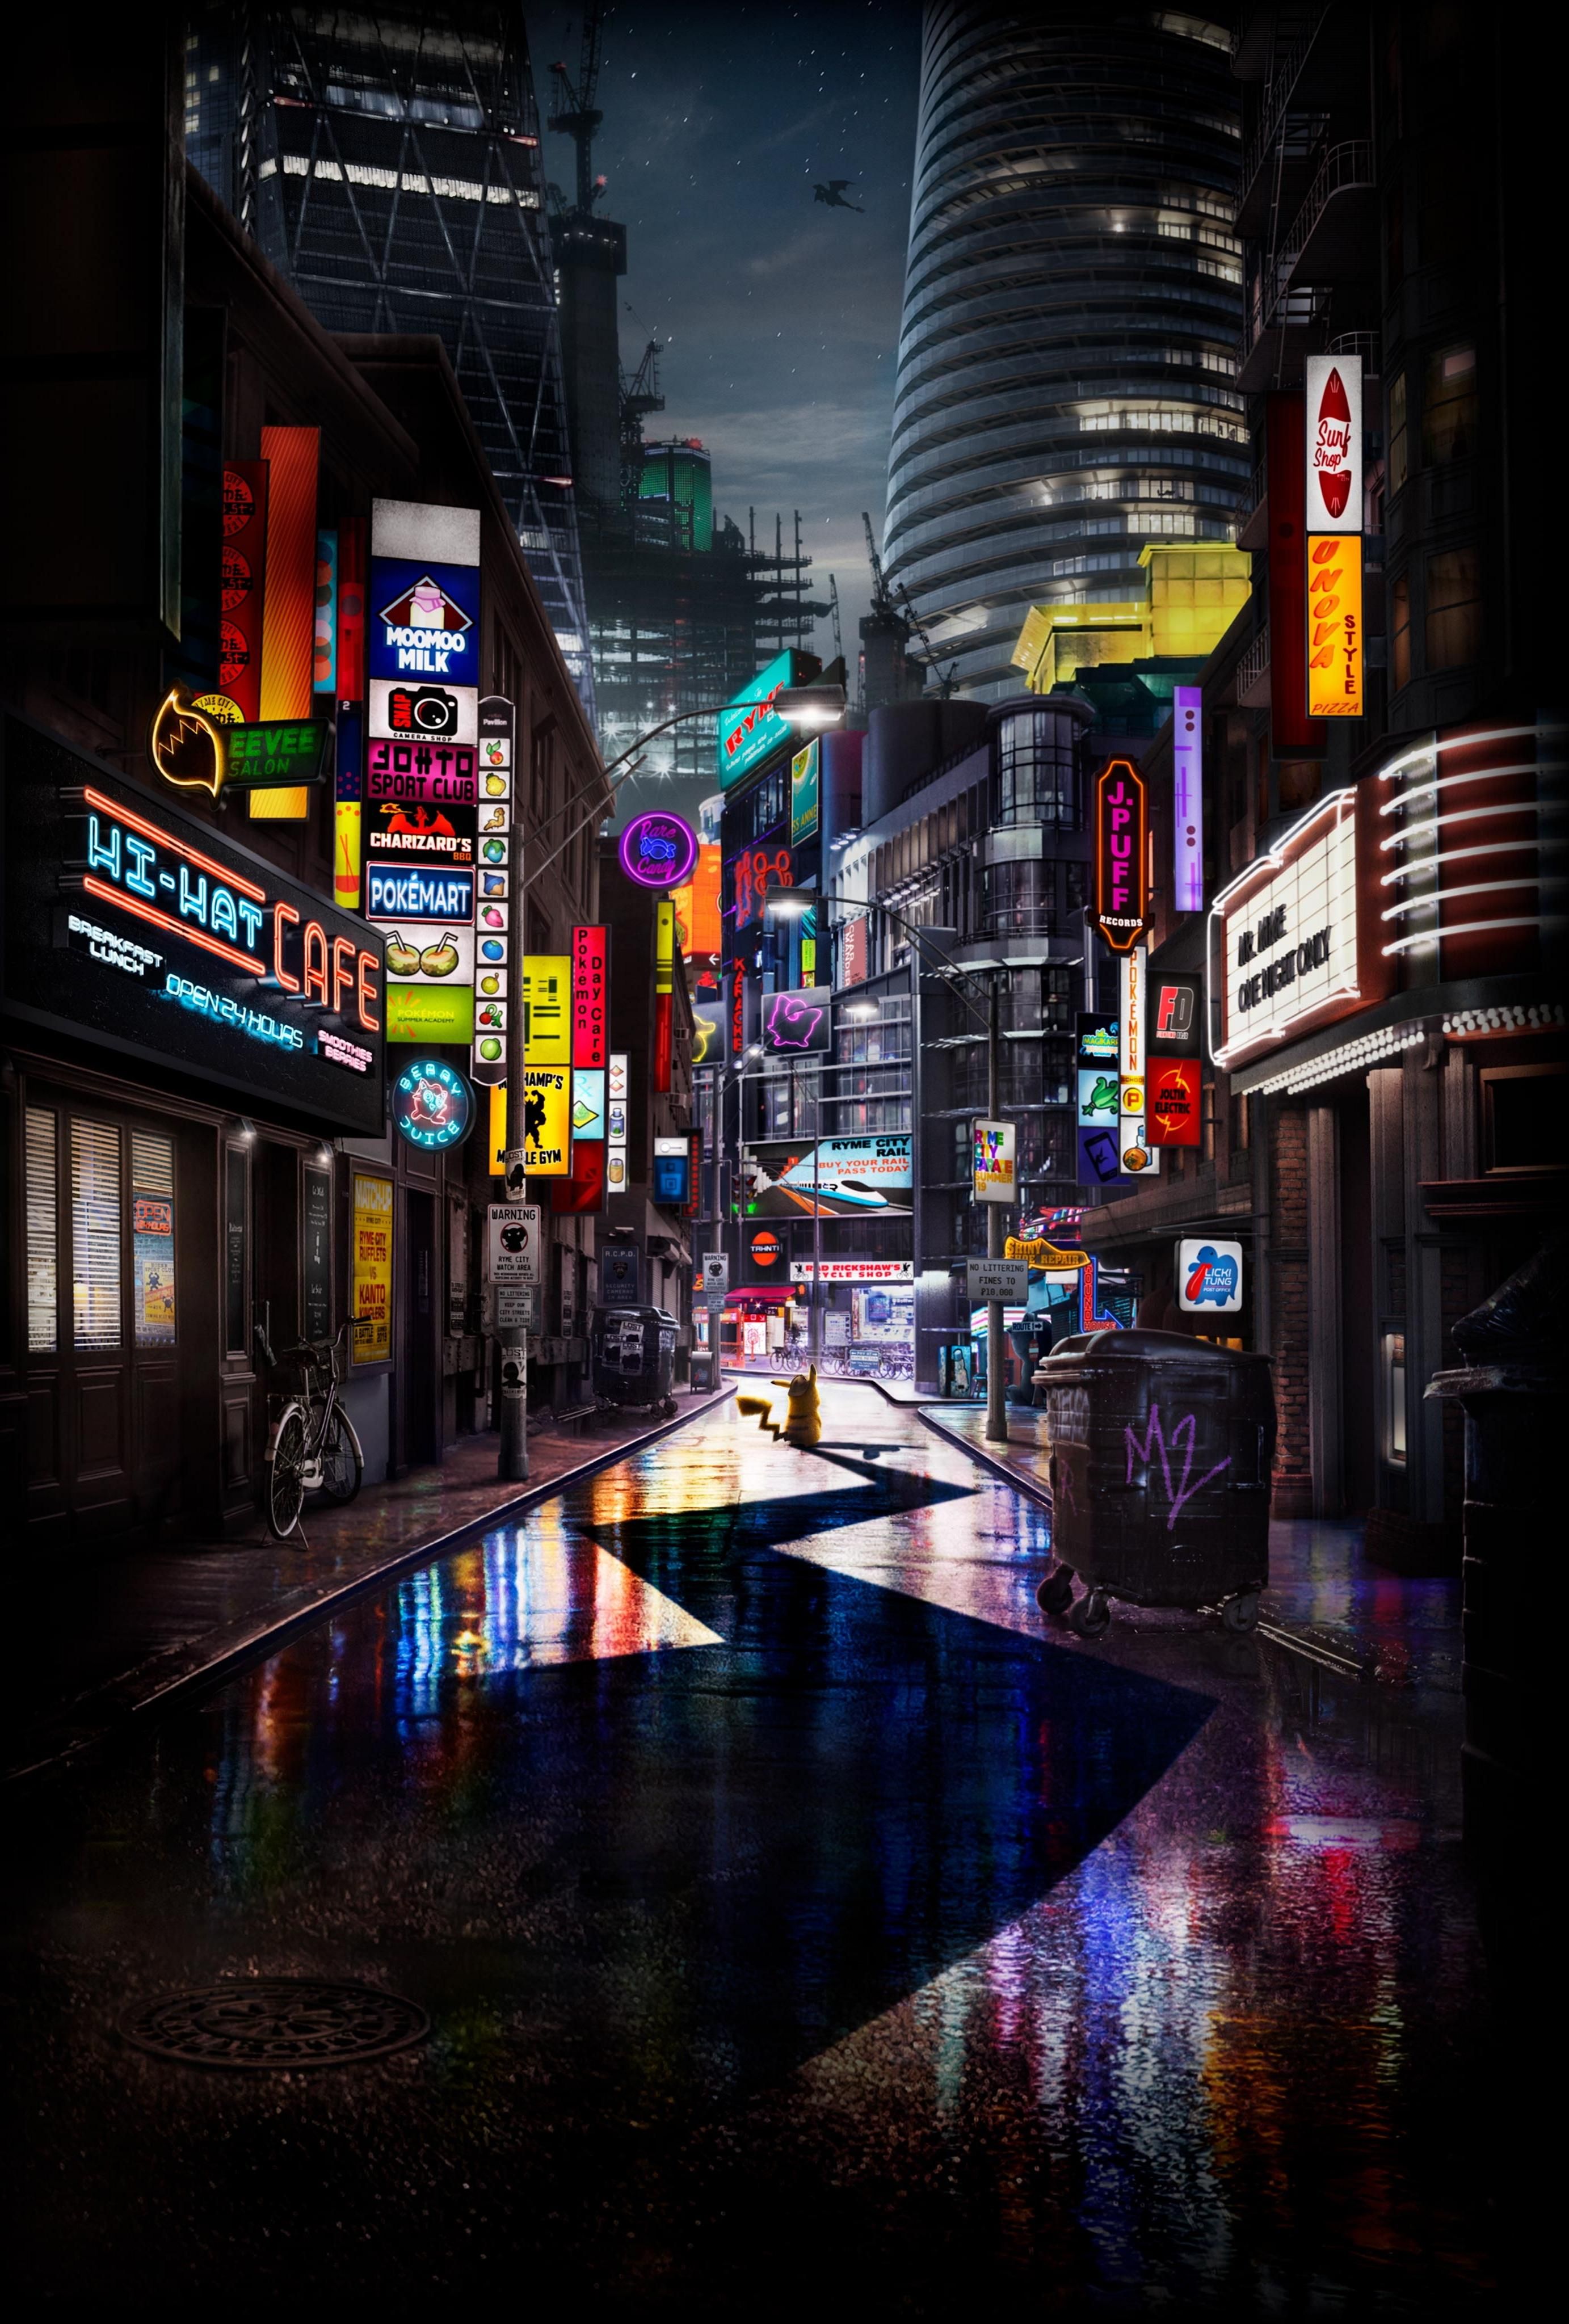 Detective Pikachu Textless Poster X Cityscapes